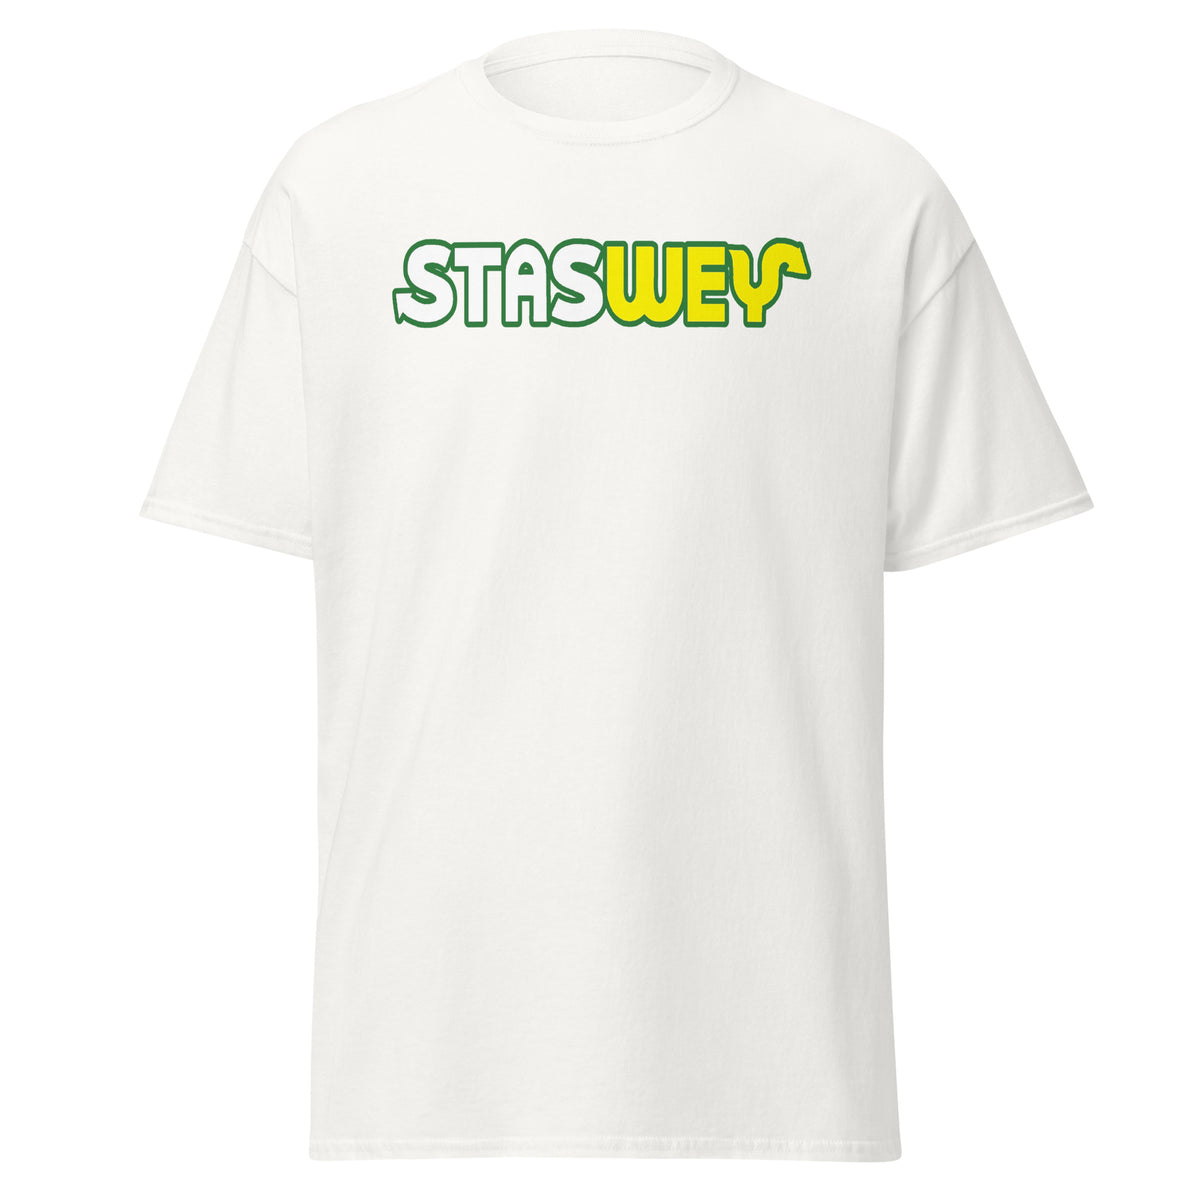 StasWey T-Shirt (You&#39;re a fool)